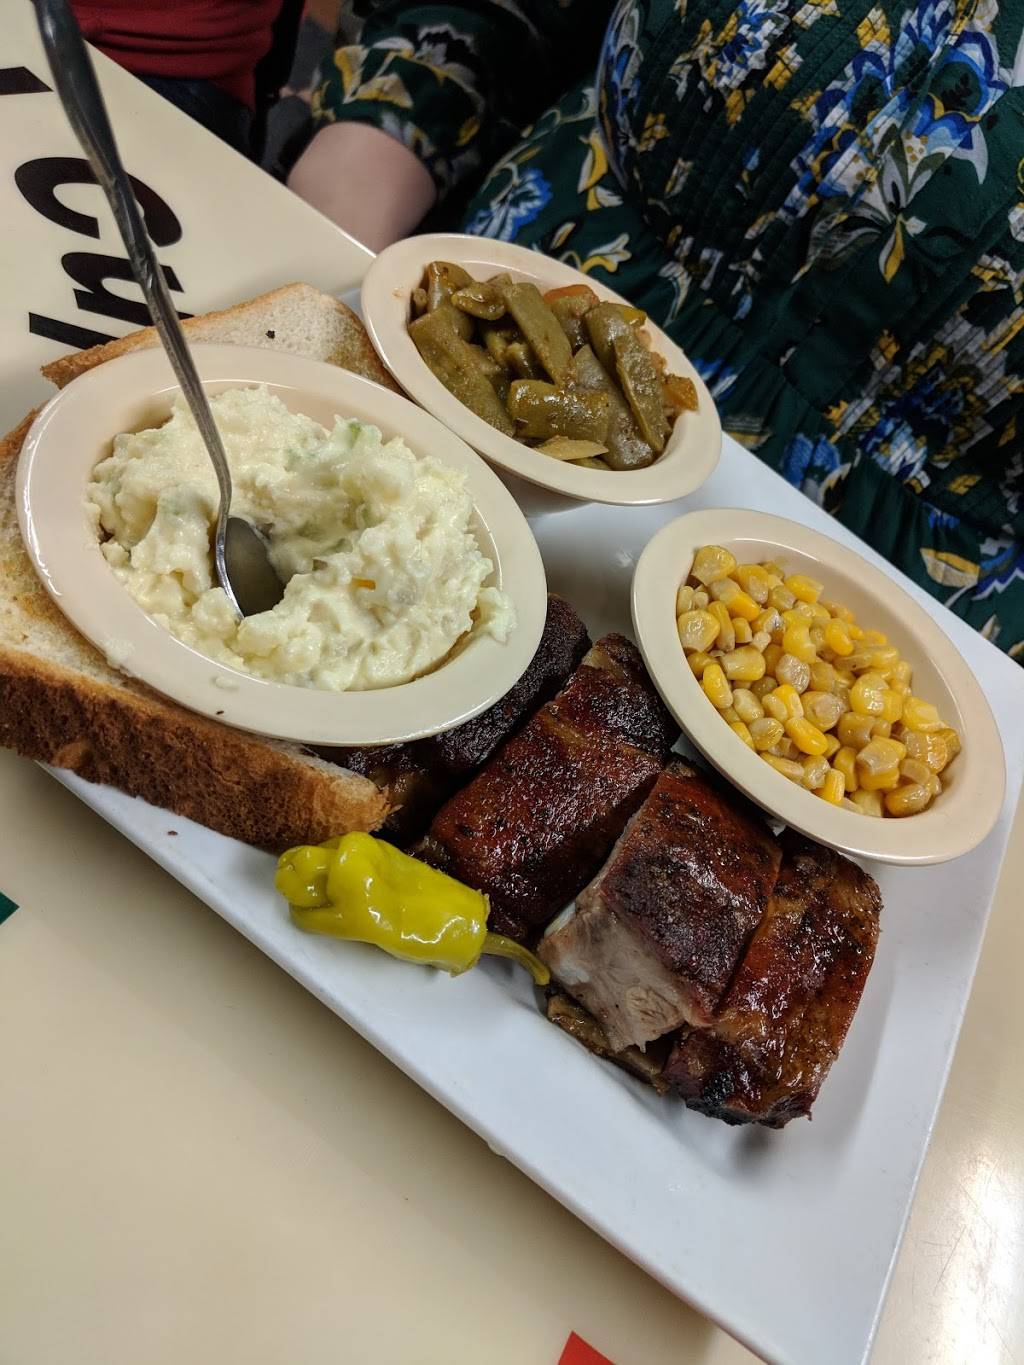 Hickory House Barbecue | restaurant | 600 S Riverfront Blvd, Dallas, TX 75207, USA | 2147470758 OR +1 214-747-0758